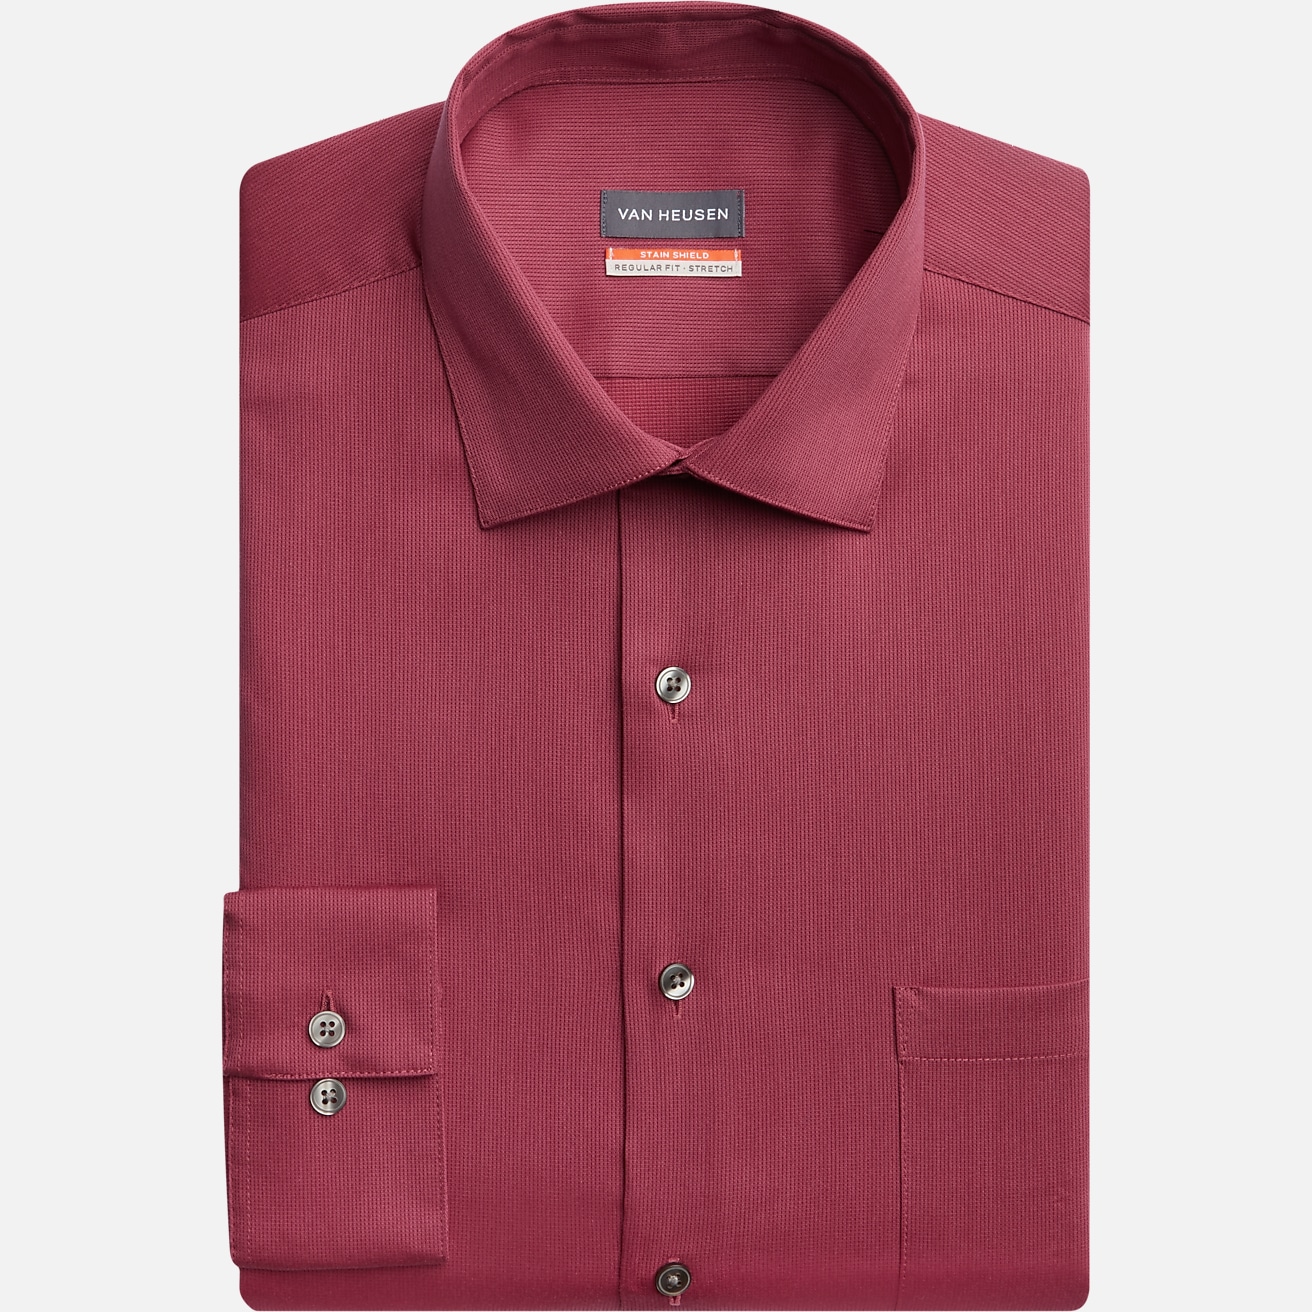 https://image.menswearhouse.com/is/image/TMW/TMW_5ET2_11_VAN_HEUSEN_DRESS_SHIRTS_BURGUNDY_SOLID_MAIN?imPolicy=pdp-mob-2x